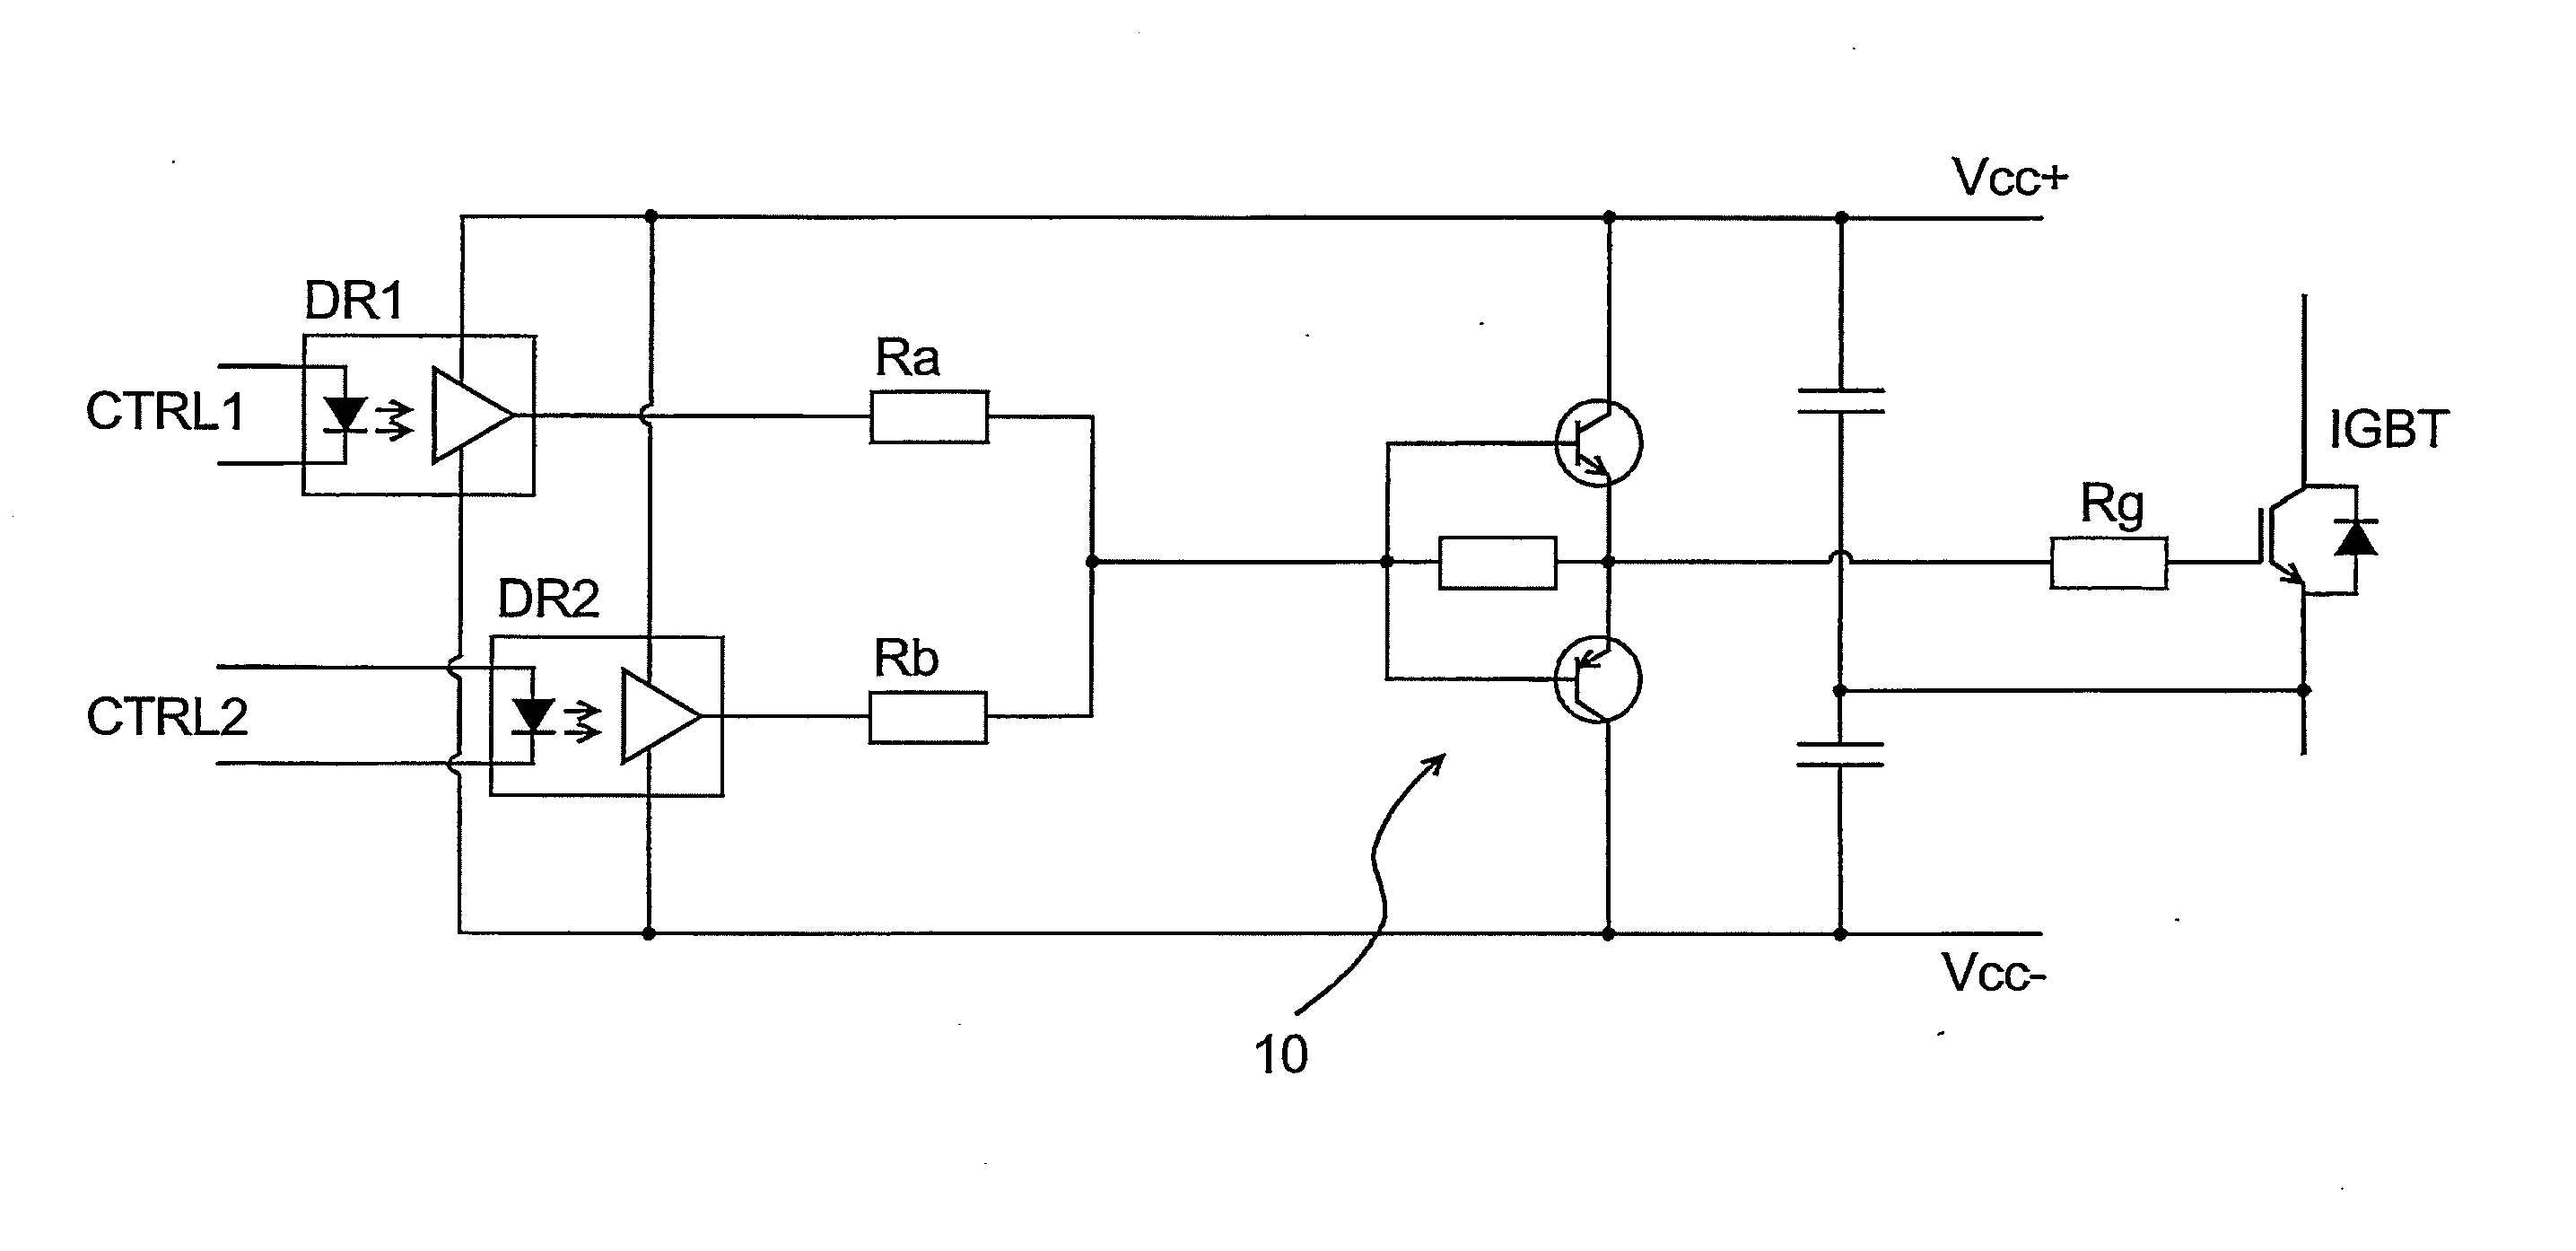 Method of controlling an IGBT and a gate driver